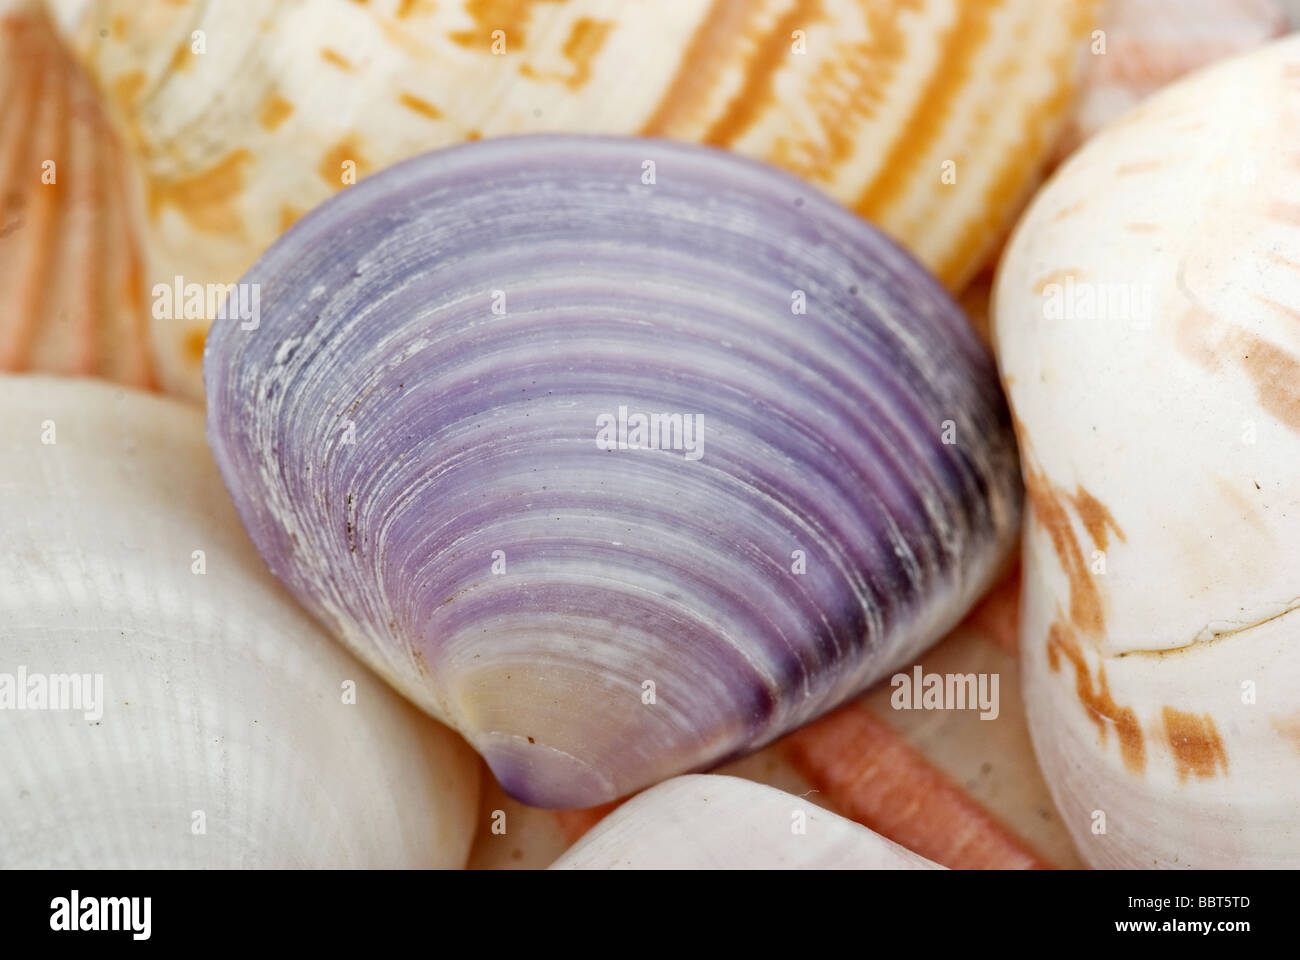 great image of some sea shells at the beach Stock Photo